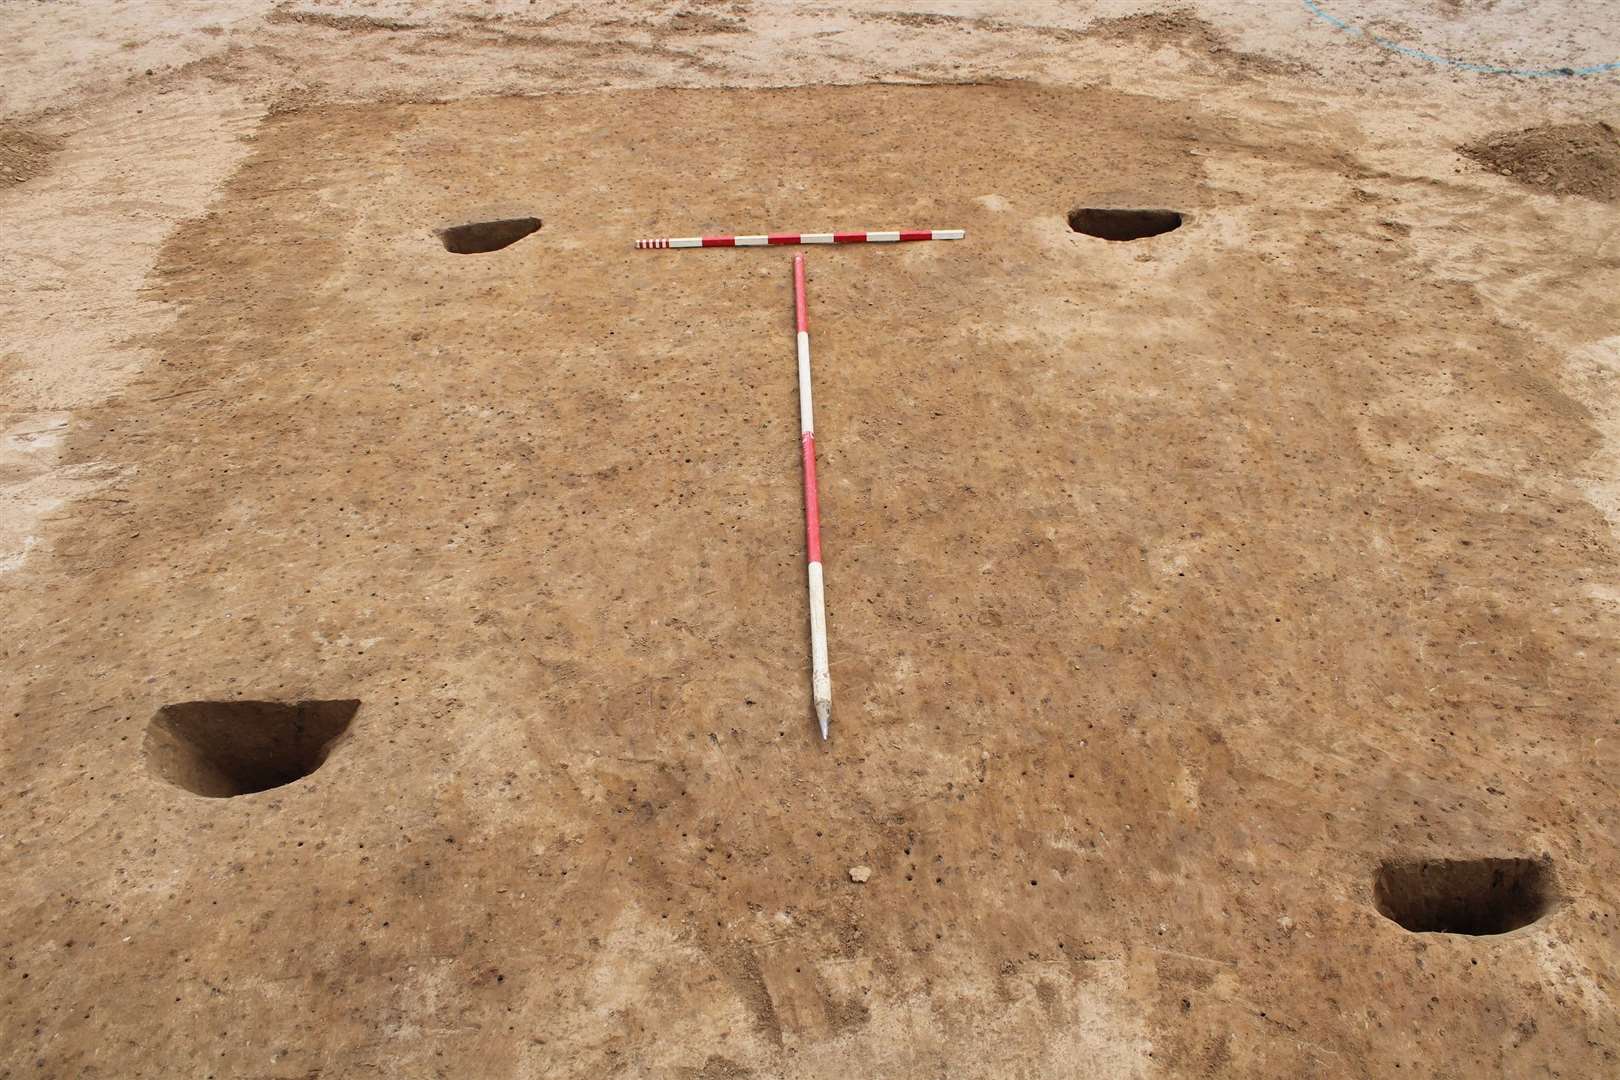 The Roman postholes found at Deal